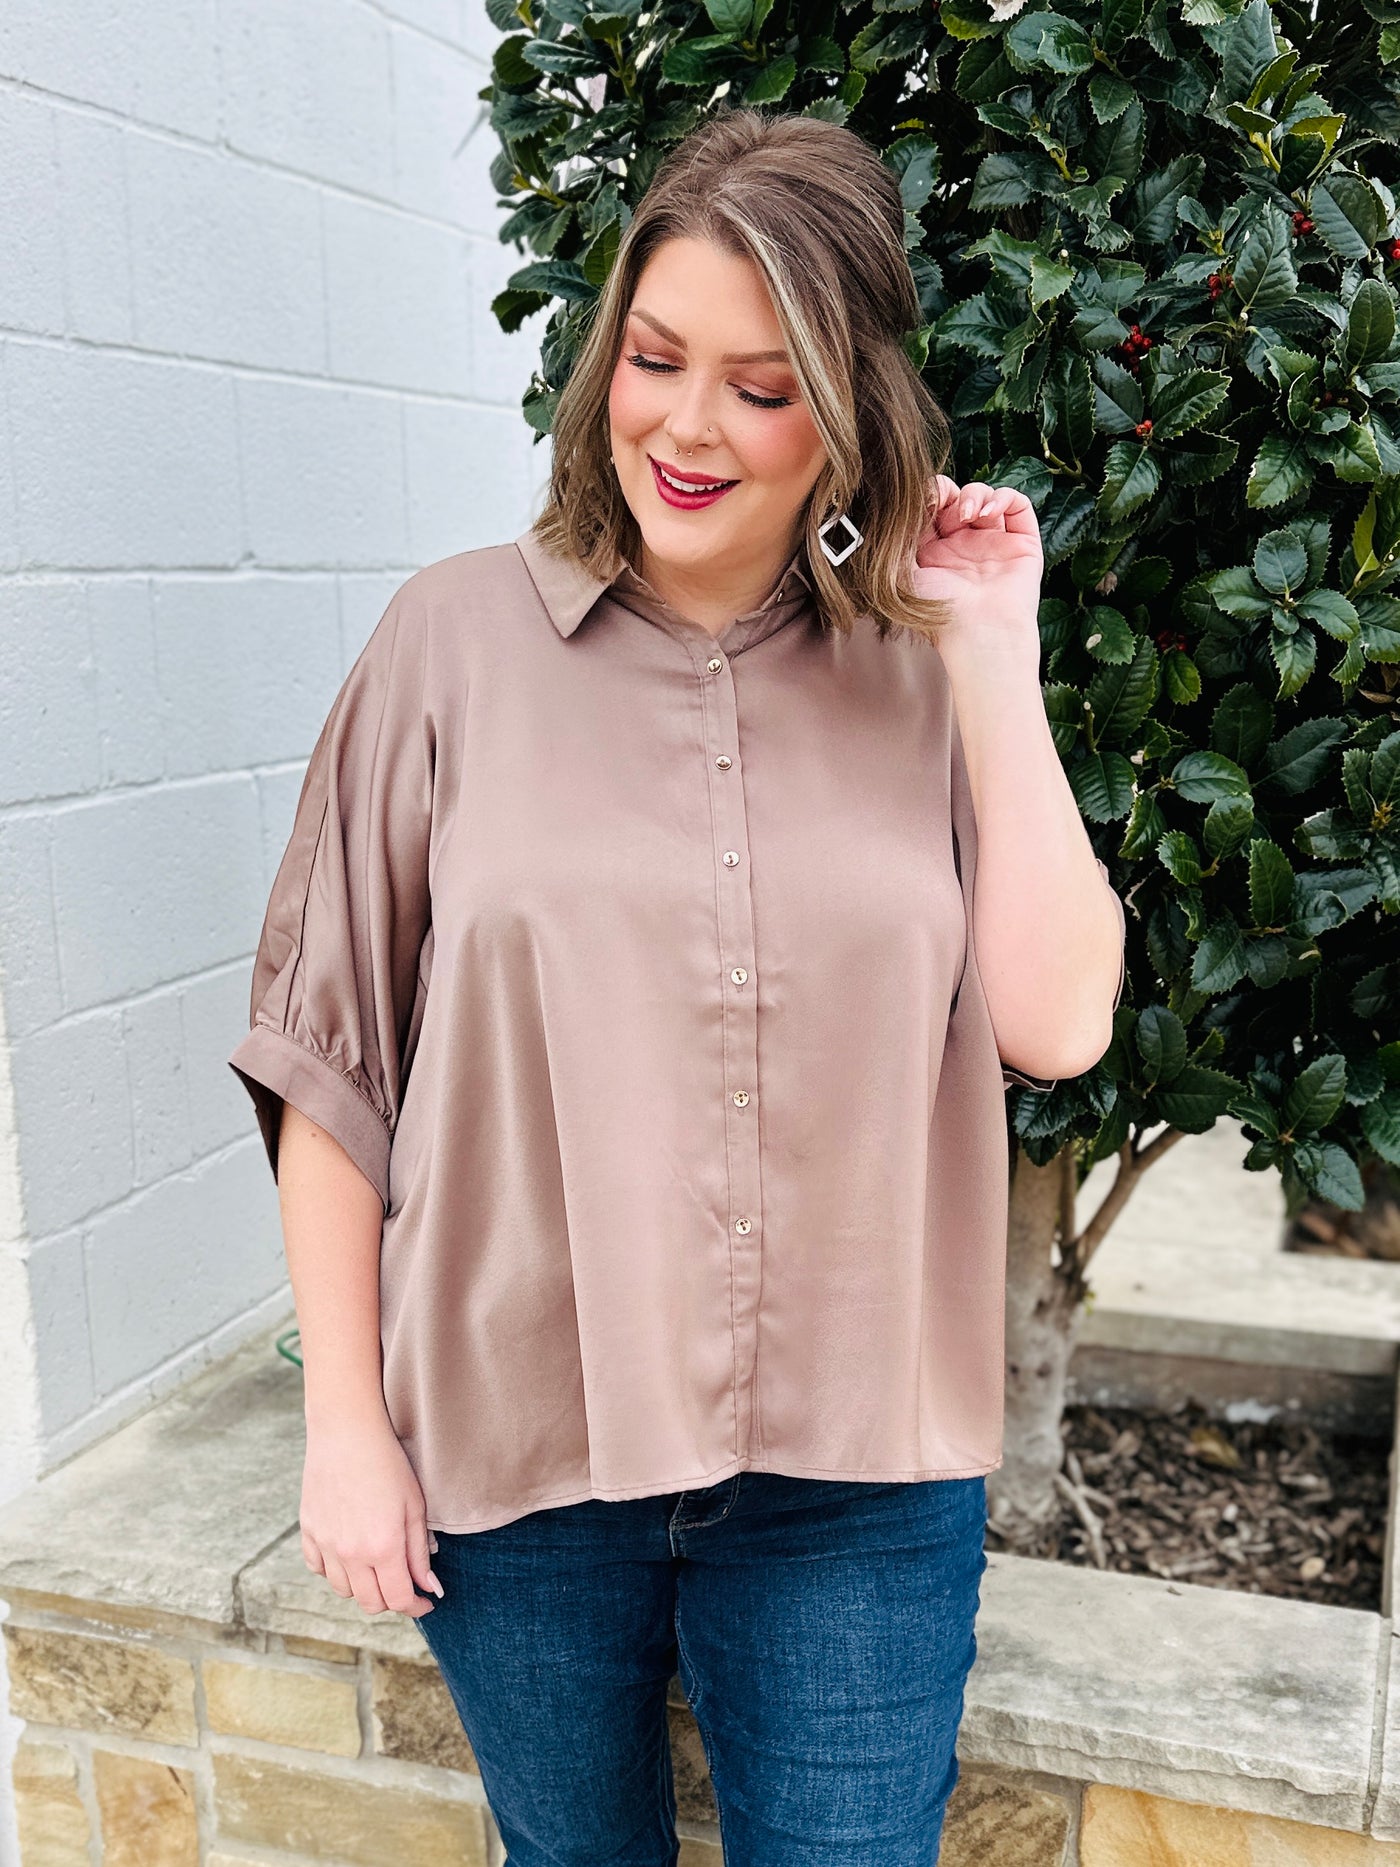 Focused on You Satin Button Up Top • Tan-EESome-Shop Anchored Bliss Women's Boutique Clothing Store